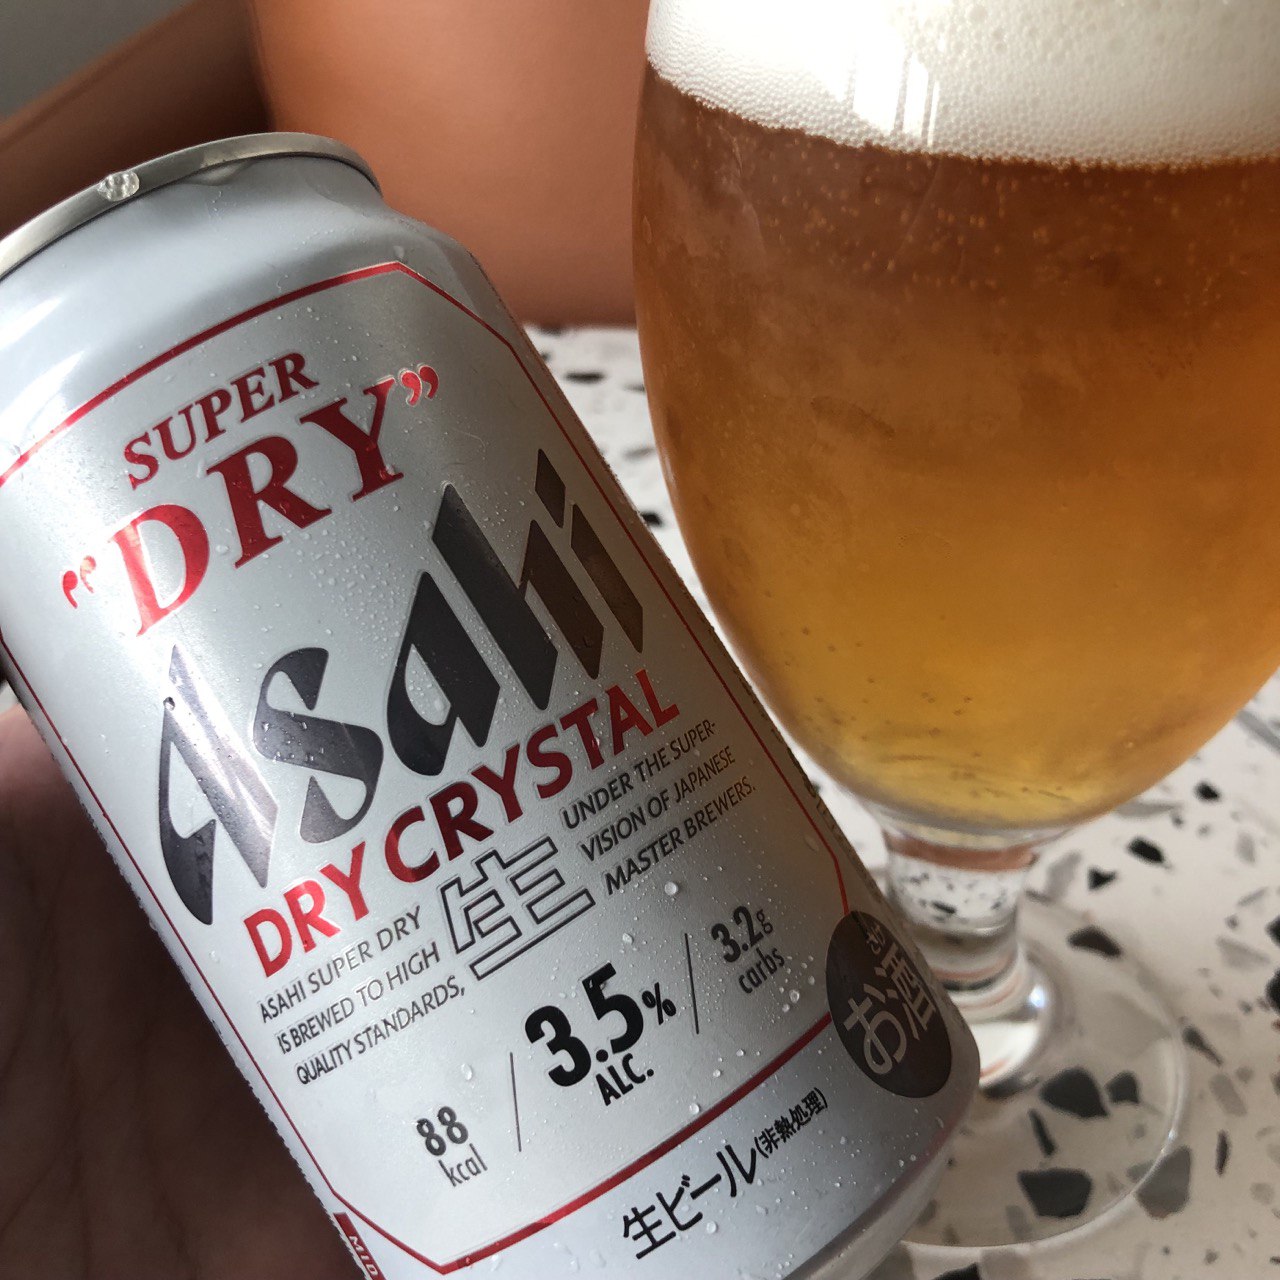 Is Japan's new Asahi Super Dry beer better or worse than the